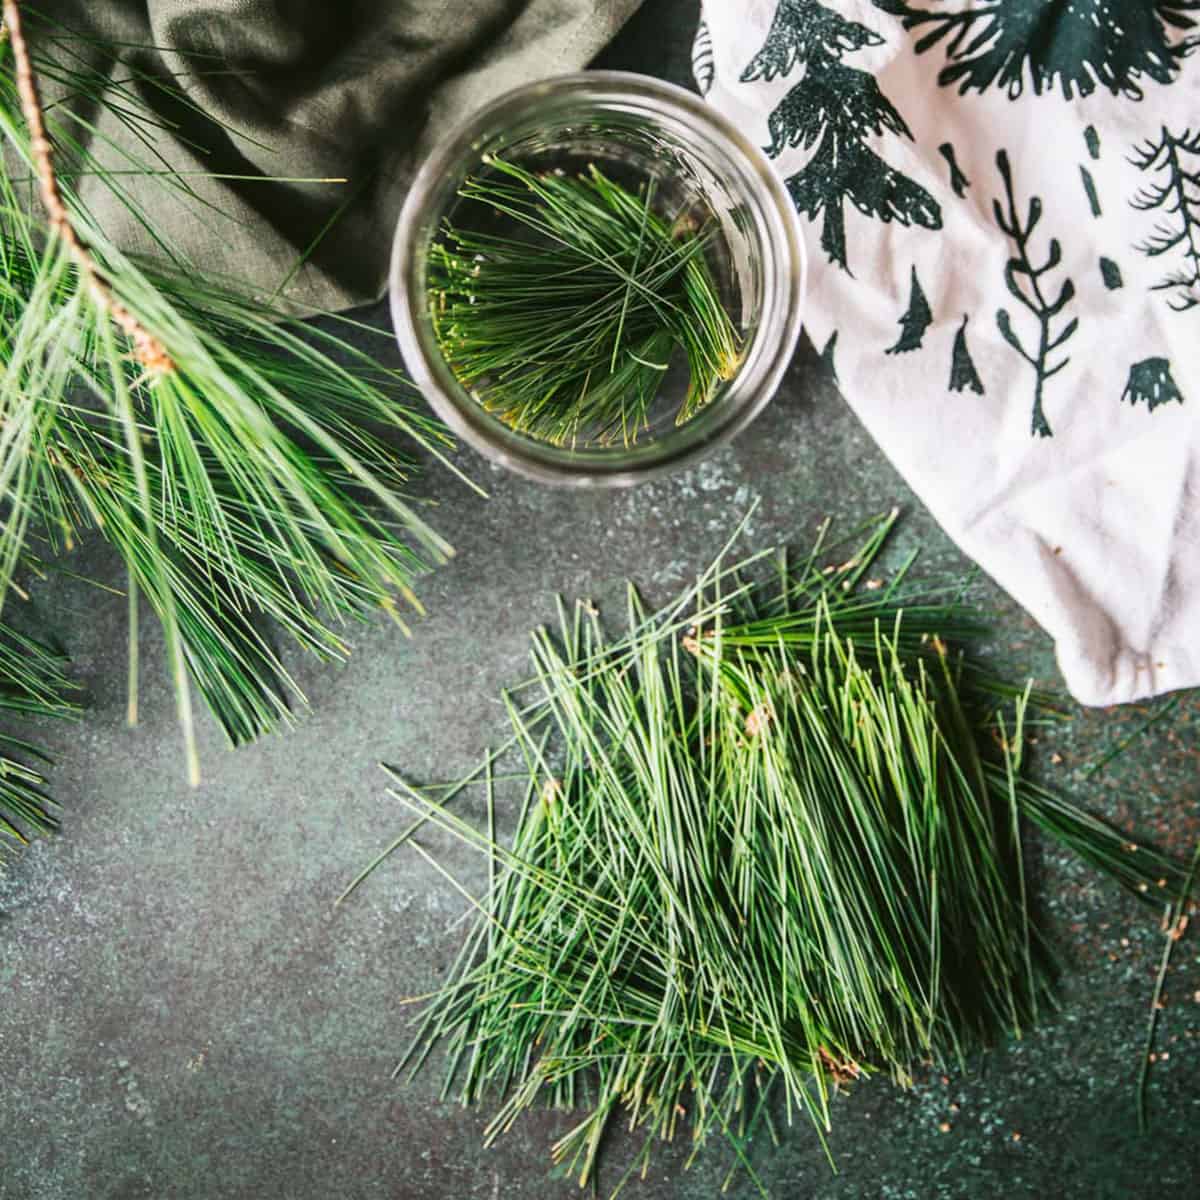 30+ Pine Needle Recipes: Drinks, Desserts, Syrups, Balms & More!